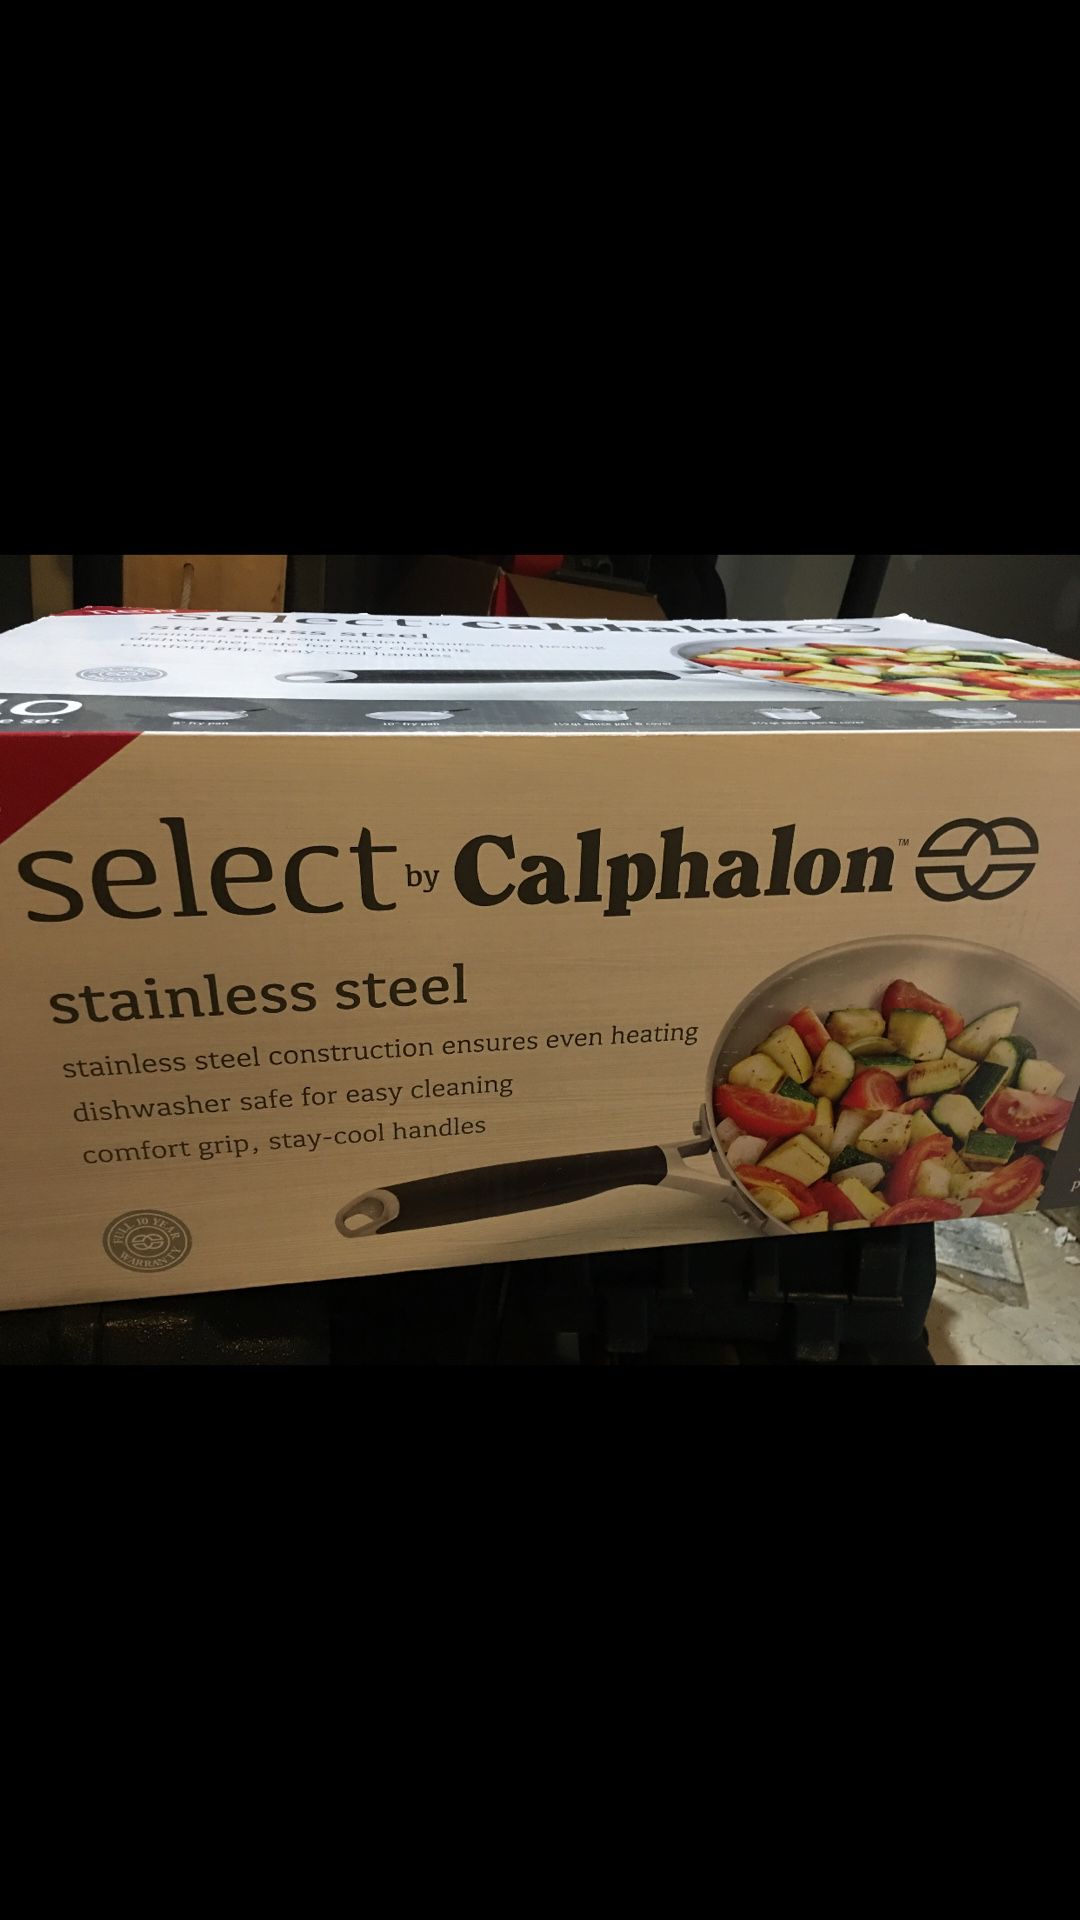 Select by Calphalon Stainless Steel 10-Piece Cookware Set